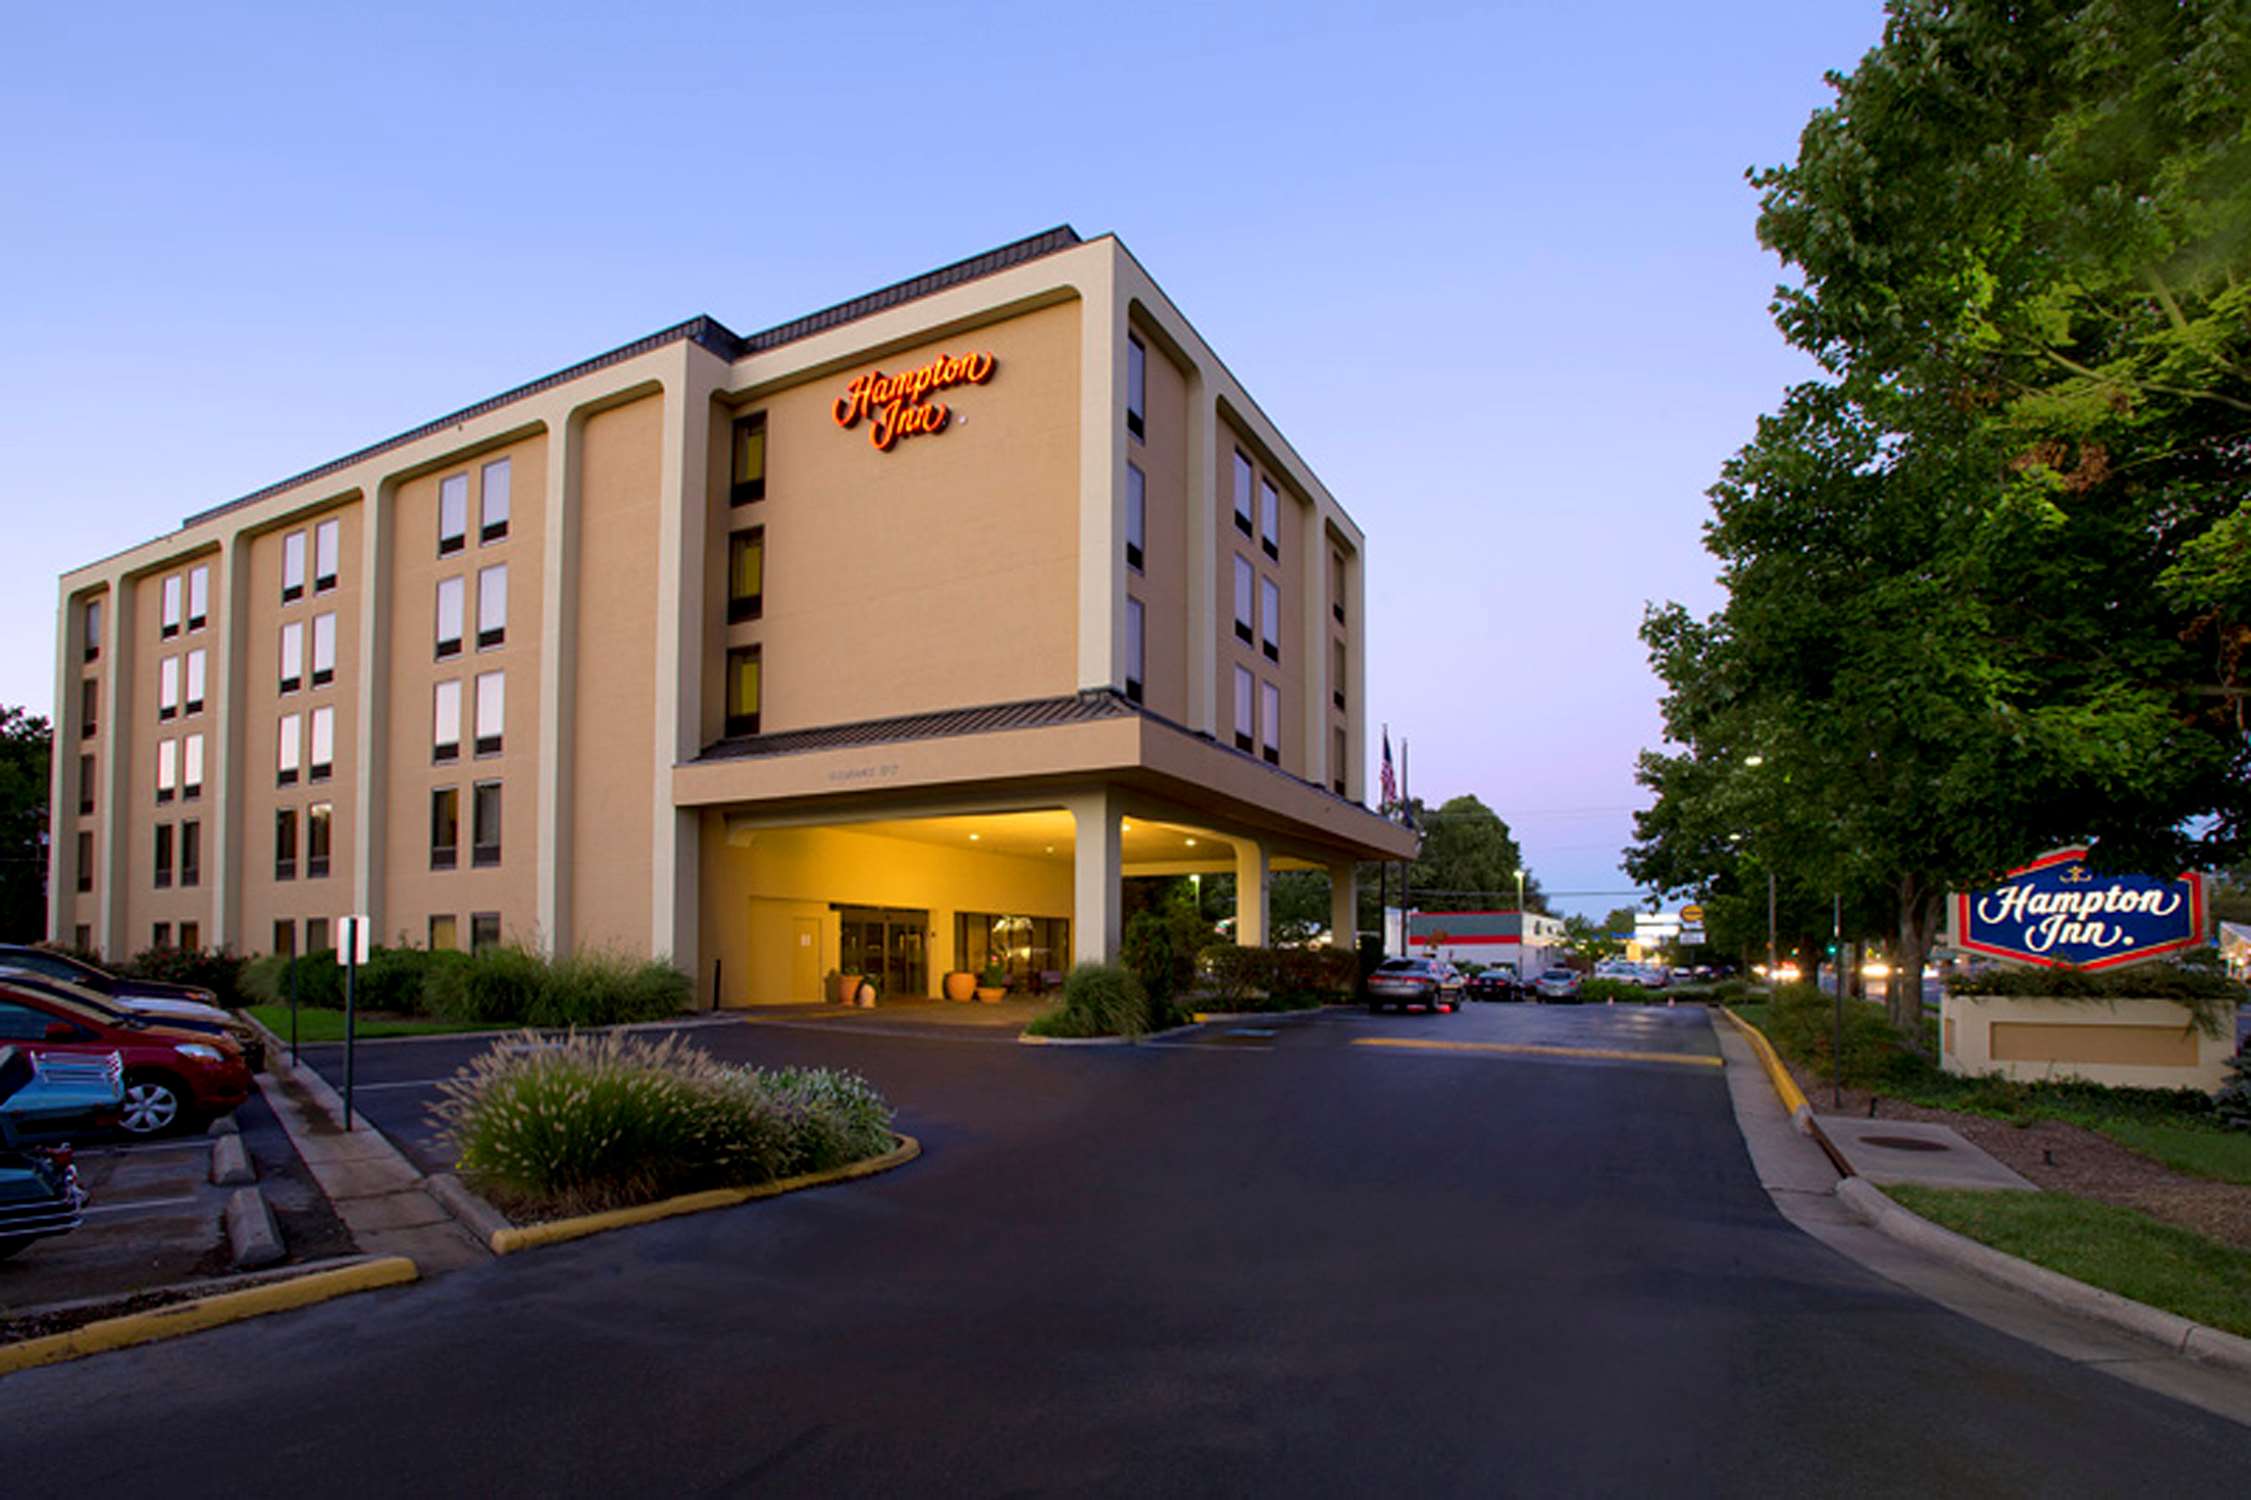 Get directions, reviews and information for Hampton Inn Fairfax City in Fai...